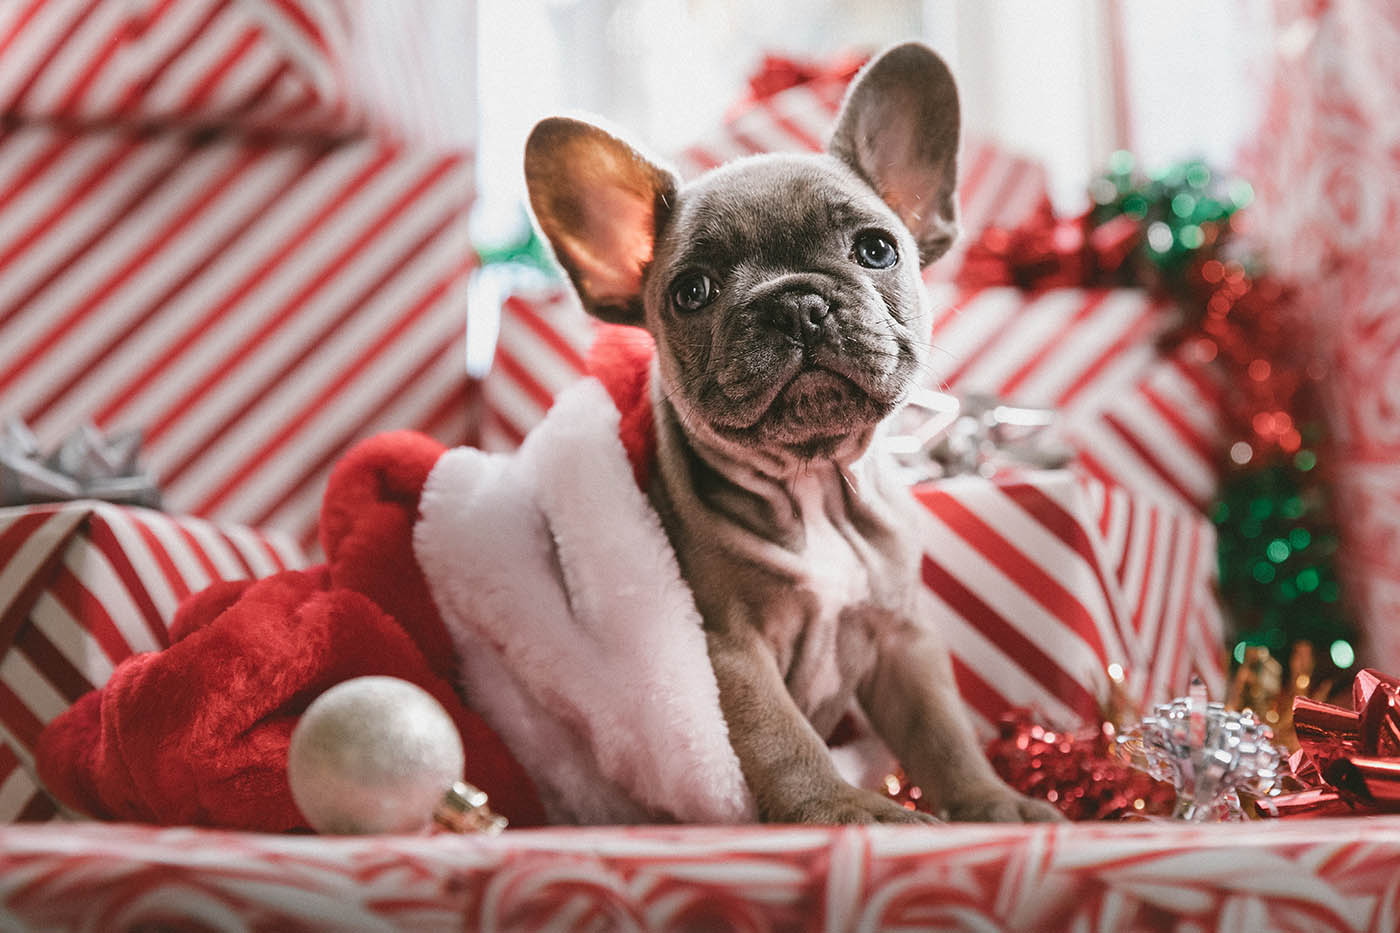 The 4 types of Christmas shoppers, which one are you? Pictured here is a really cute puppy at Christmas. 💗